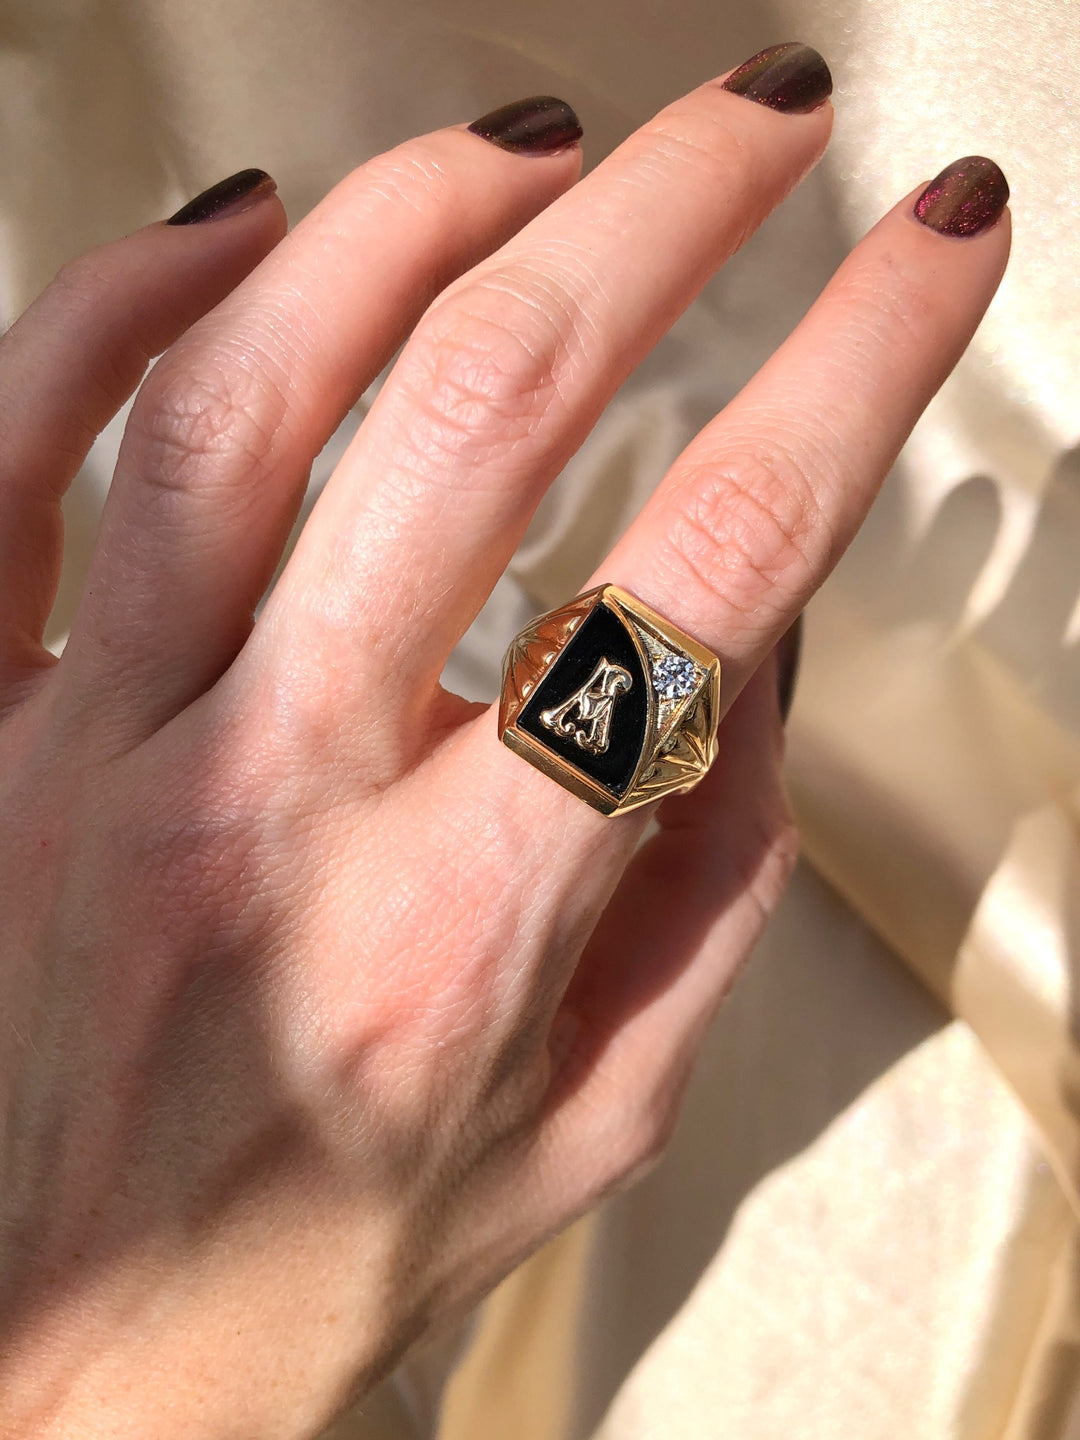 1950's Vintage "A" Signet Ring with Onyx in Solid Heavy Yellow Gold